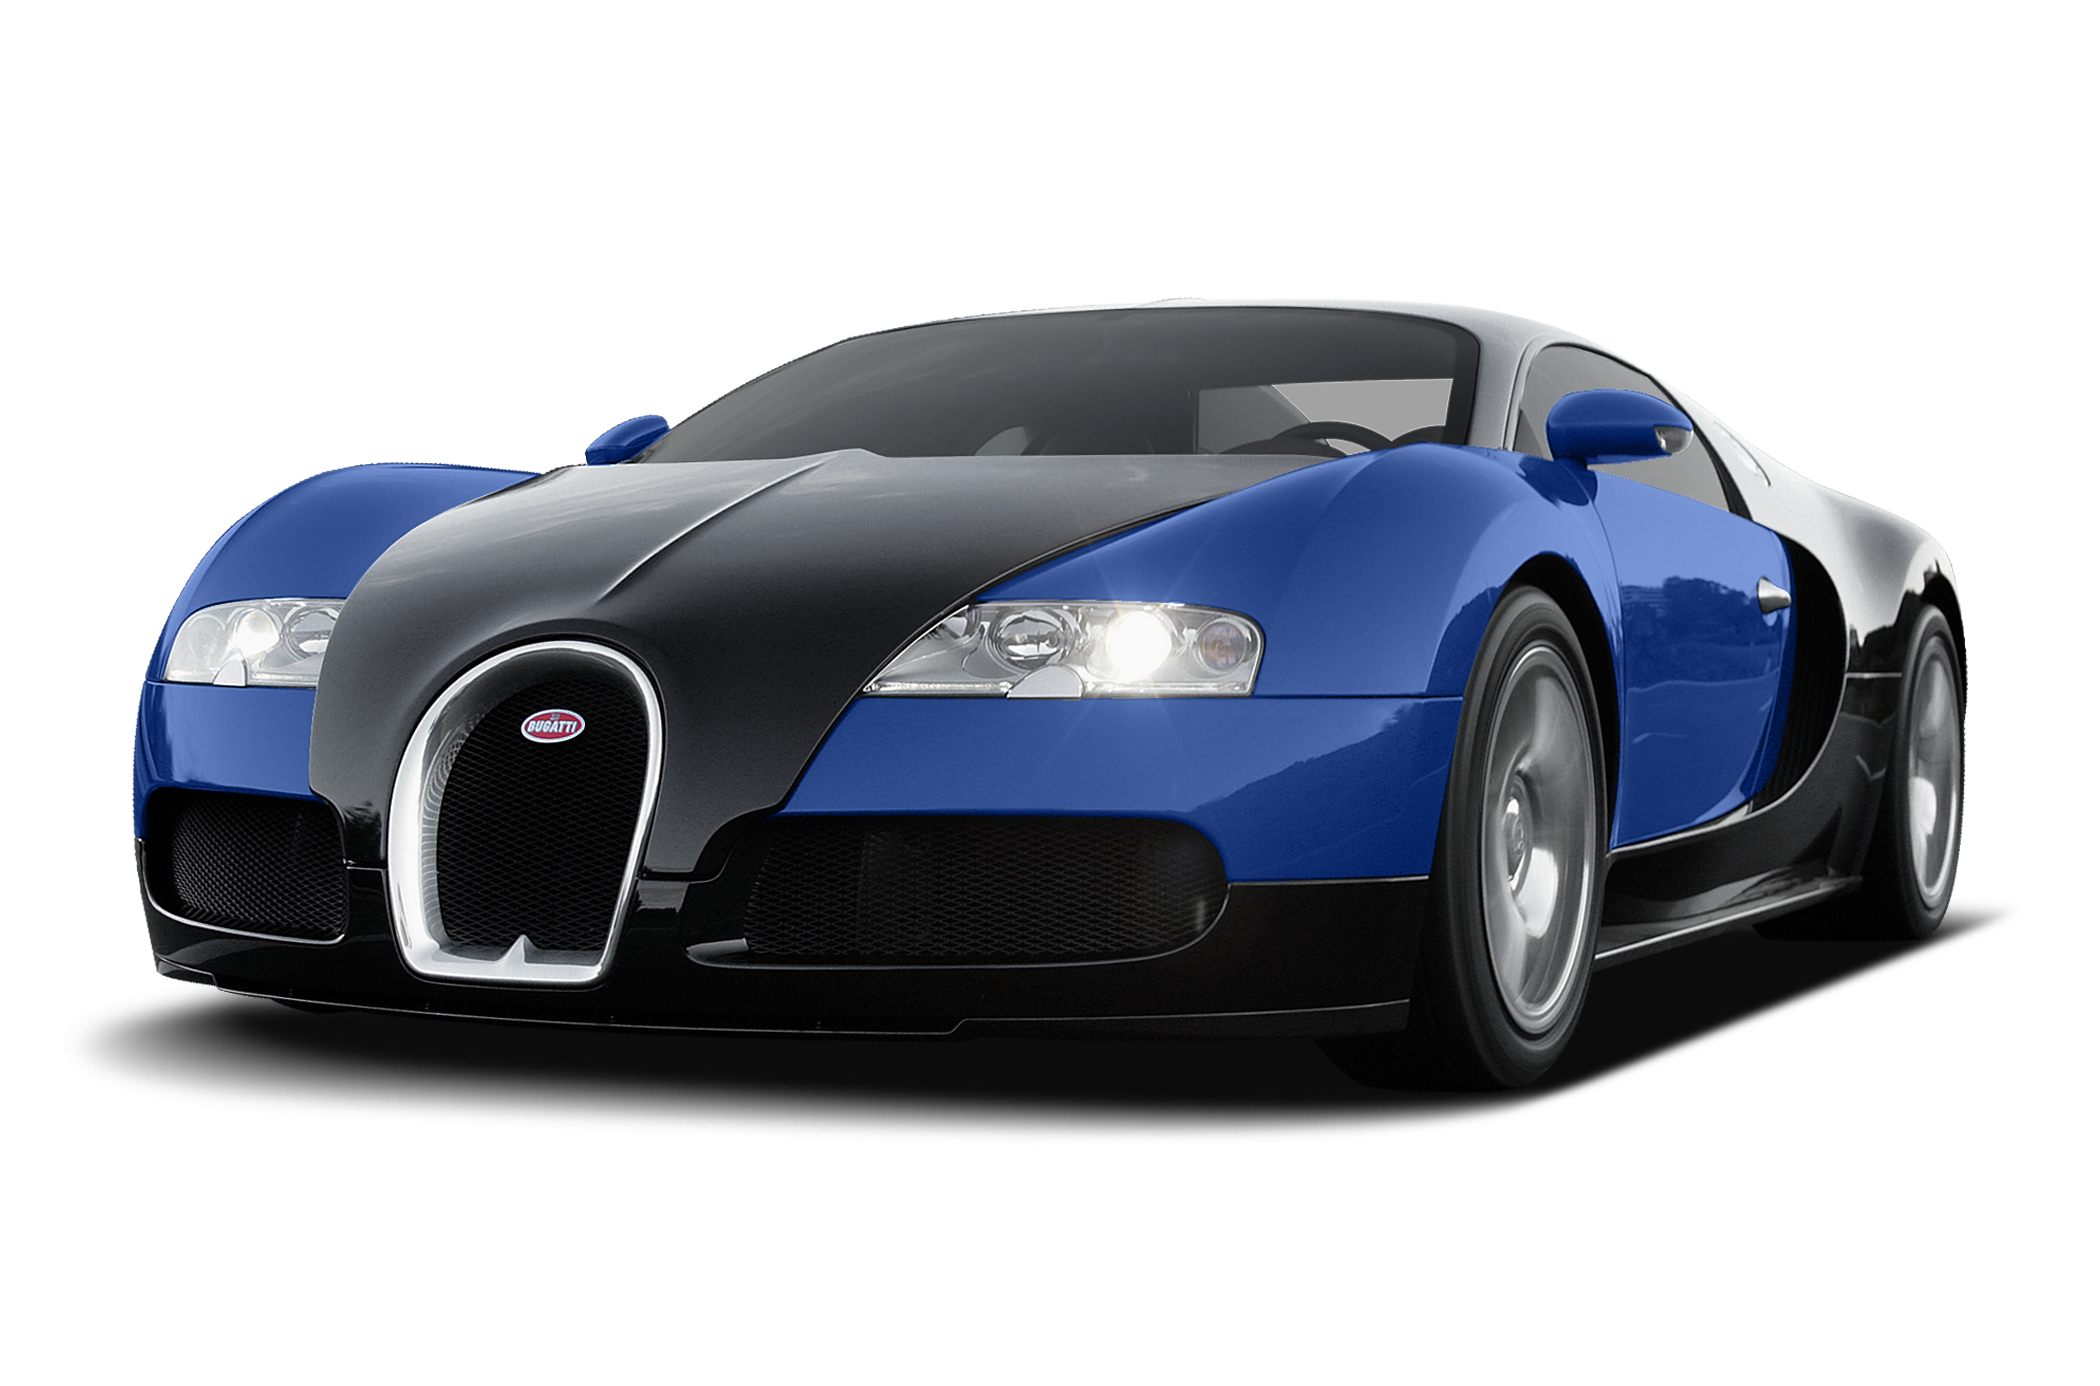 2007 Bugatti Veyron 16 4 2dr Coupe Pictures